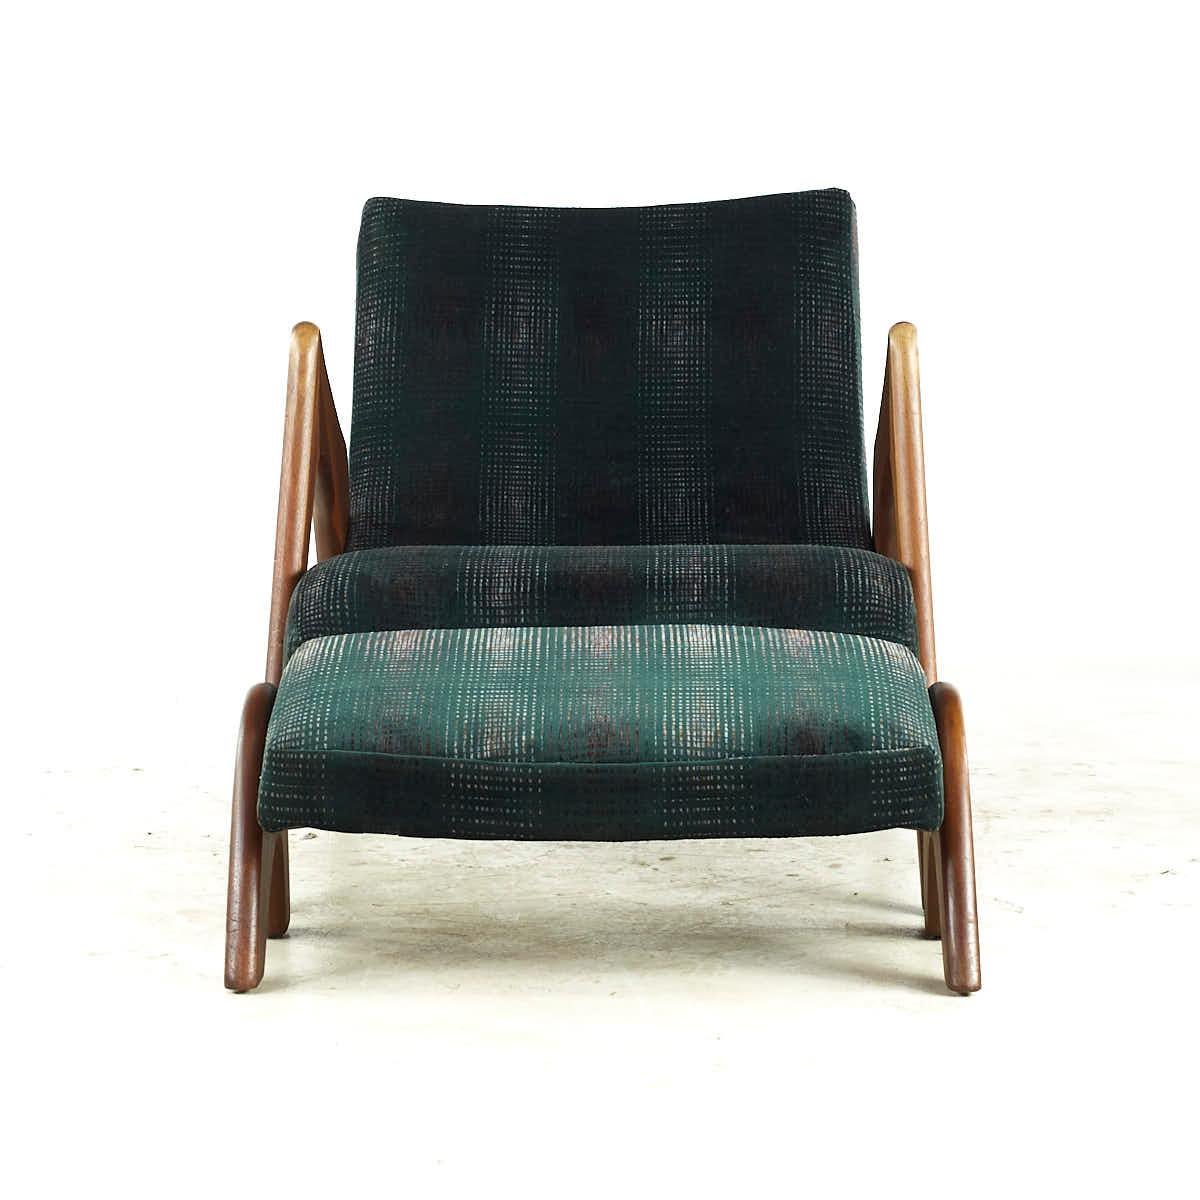 Adrian Pearsall Mid Century Walnut Grasshopper Lounge Chair with Ottoman

The chair measures: 26 wide x 50 deep x 28.75 high, with a seat height of 11 inches and arm height/chair clearance of 23.5 inches
The ottoman measures: 26.5 wide x 16.5 deep x